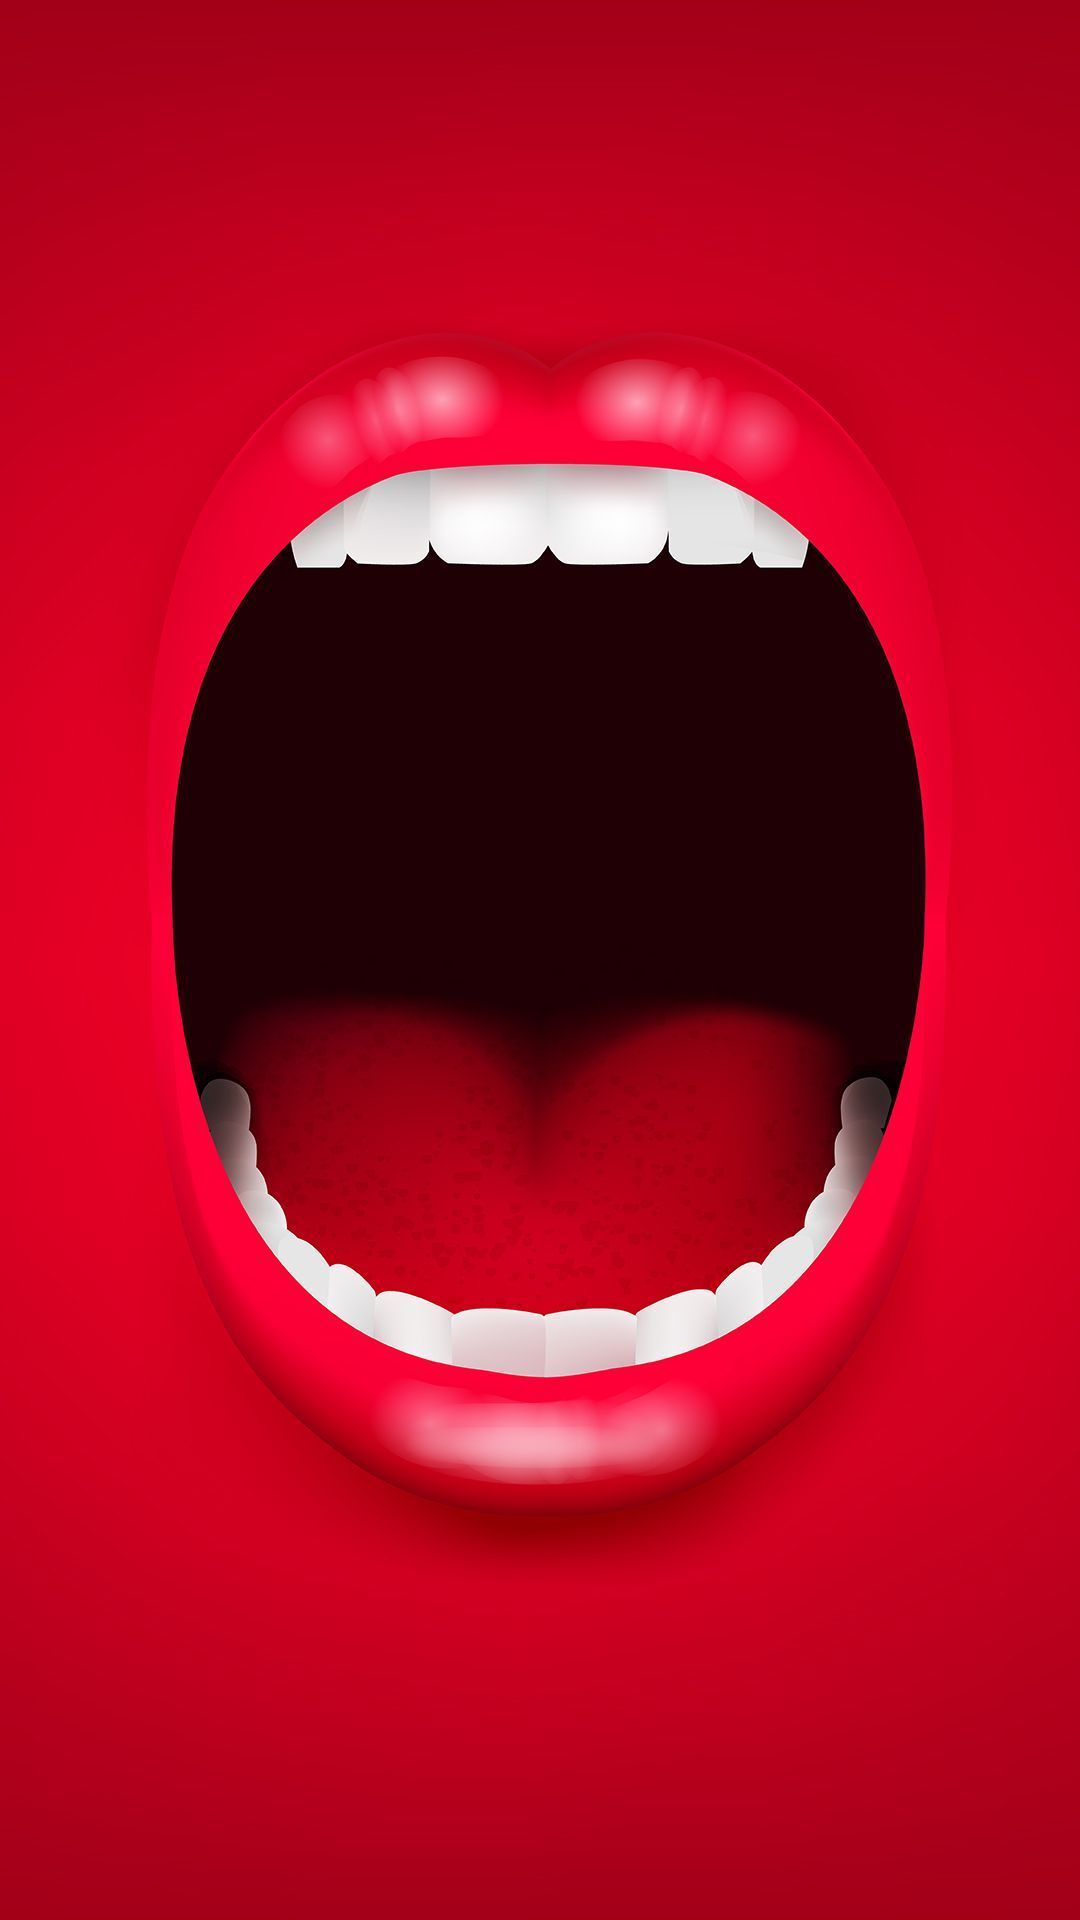 Mouth Wallpaper Free Mouth Background